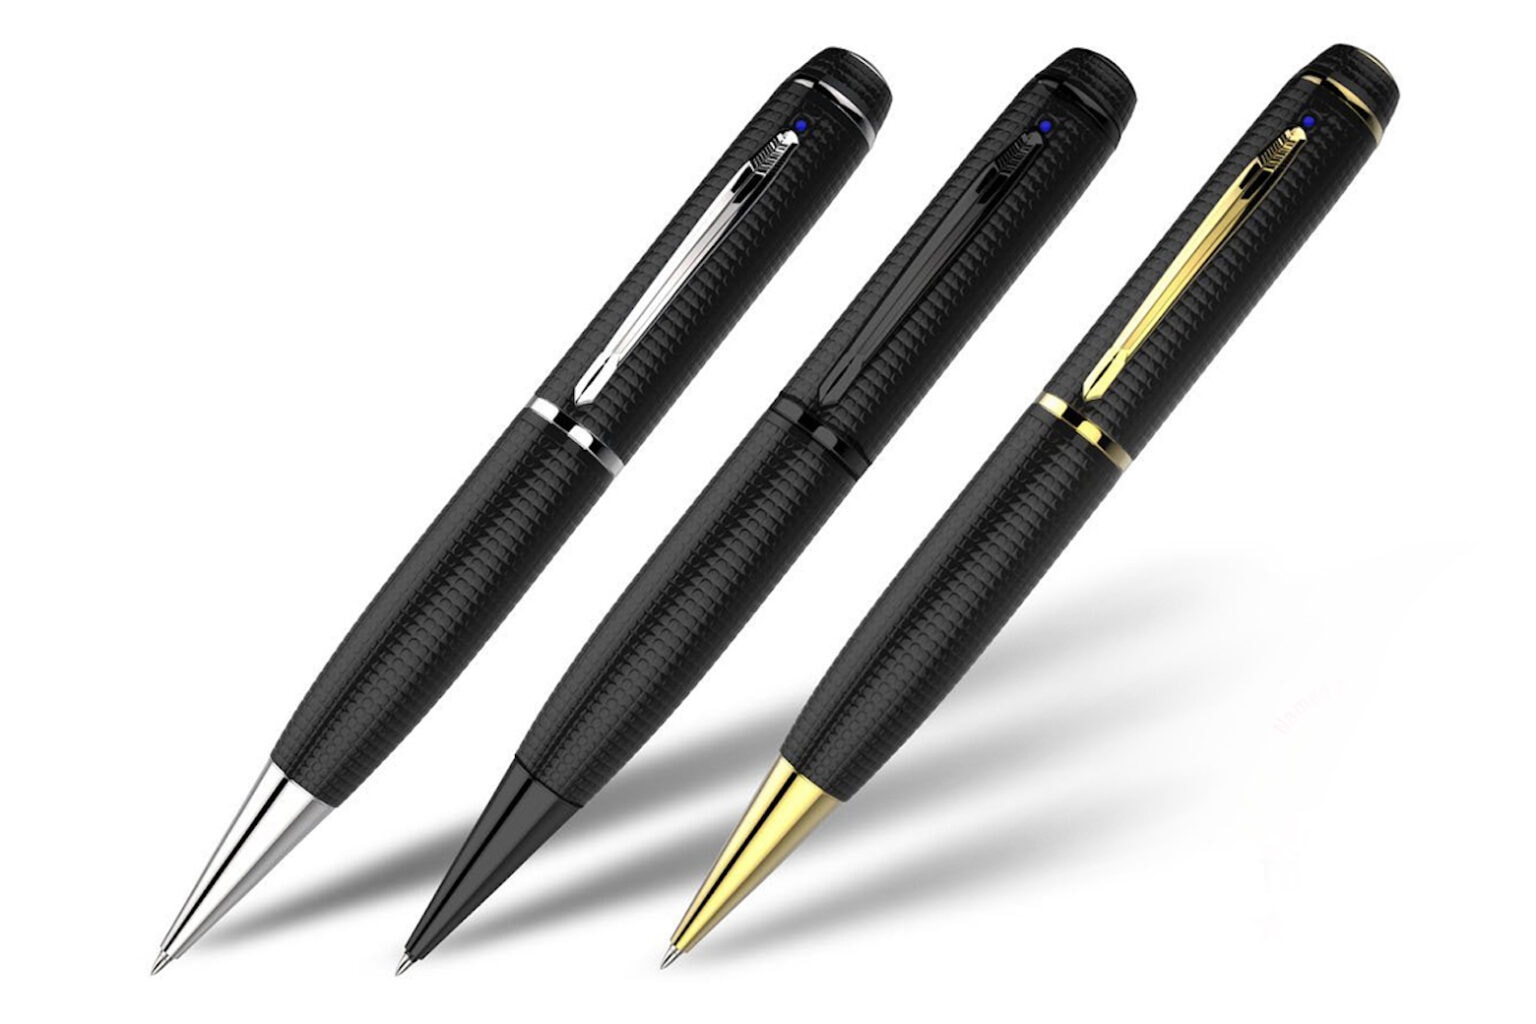 The iSpyPen Pro spy pen shown in three colors.